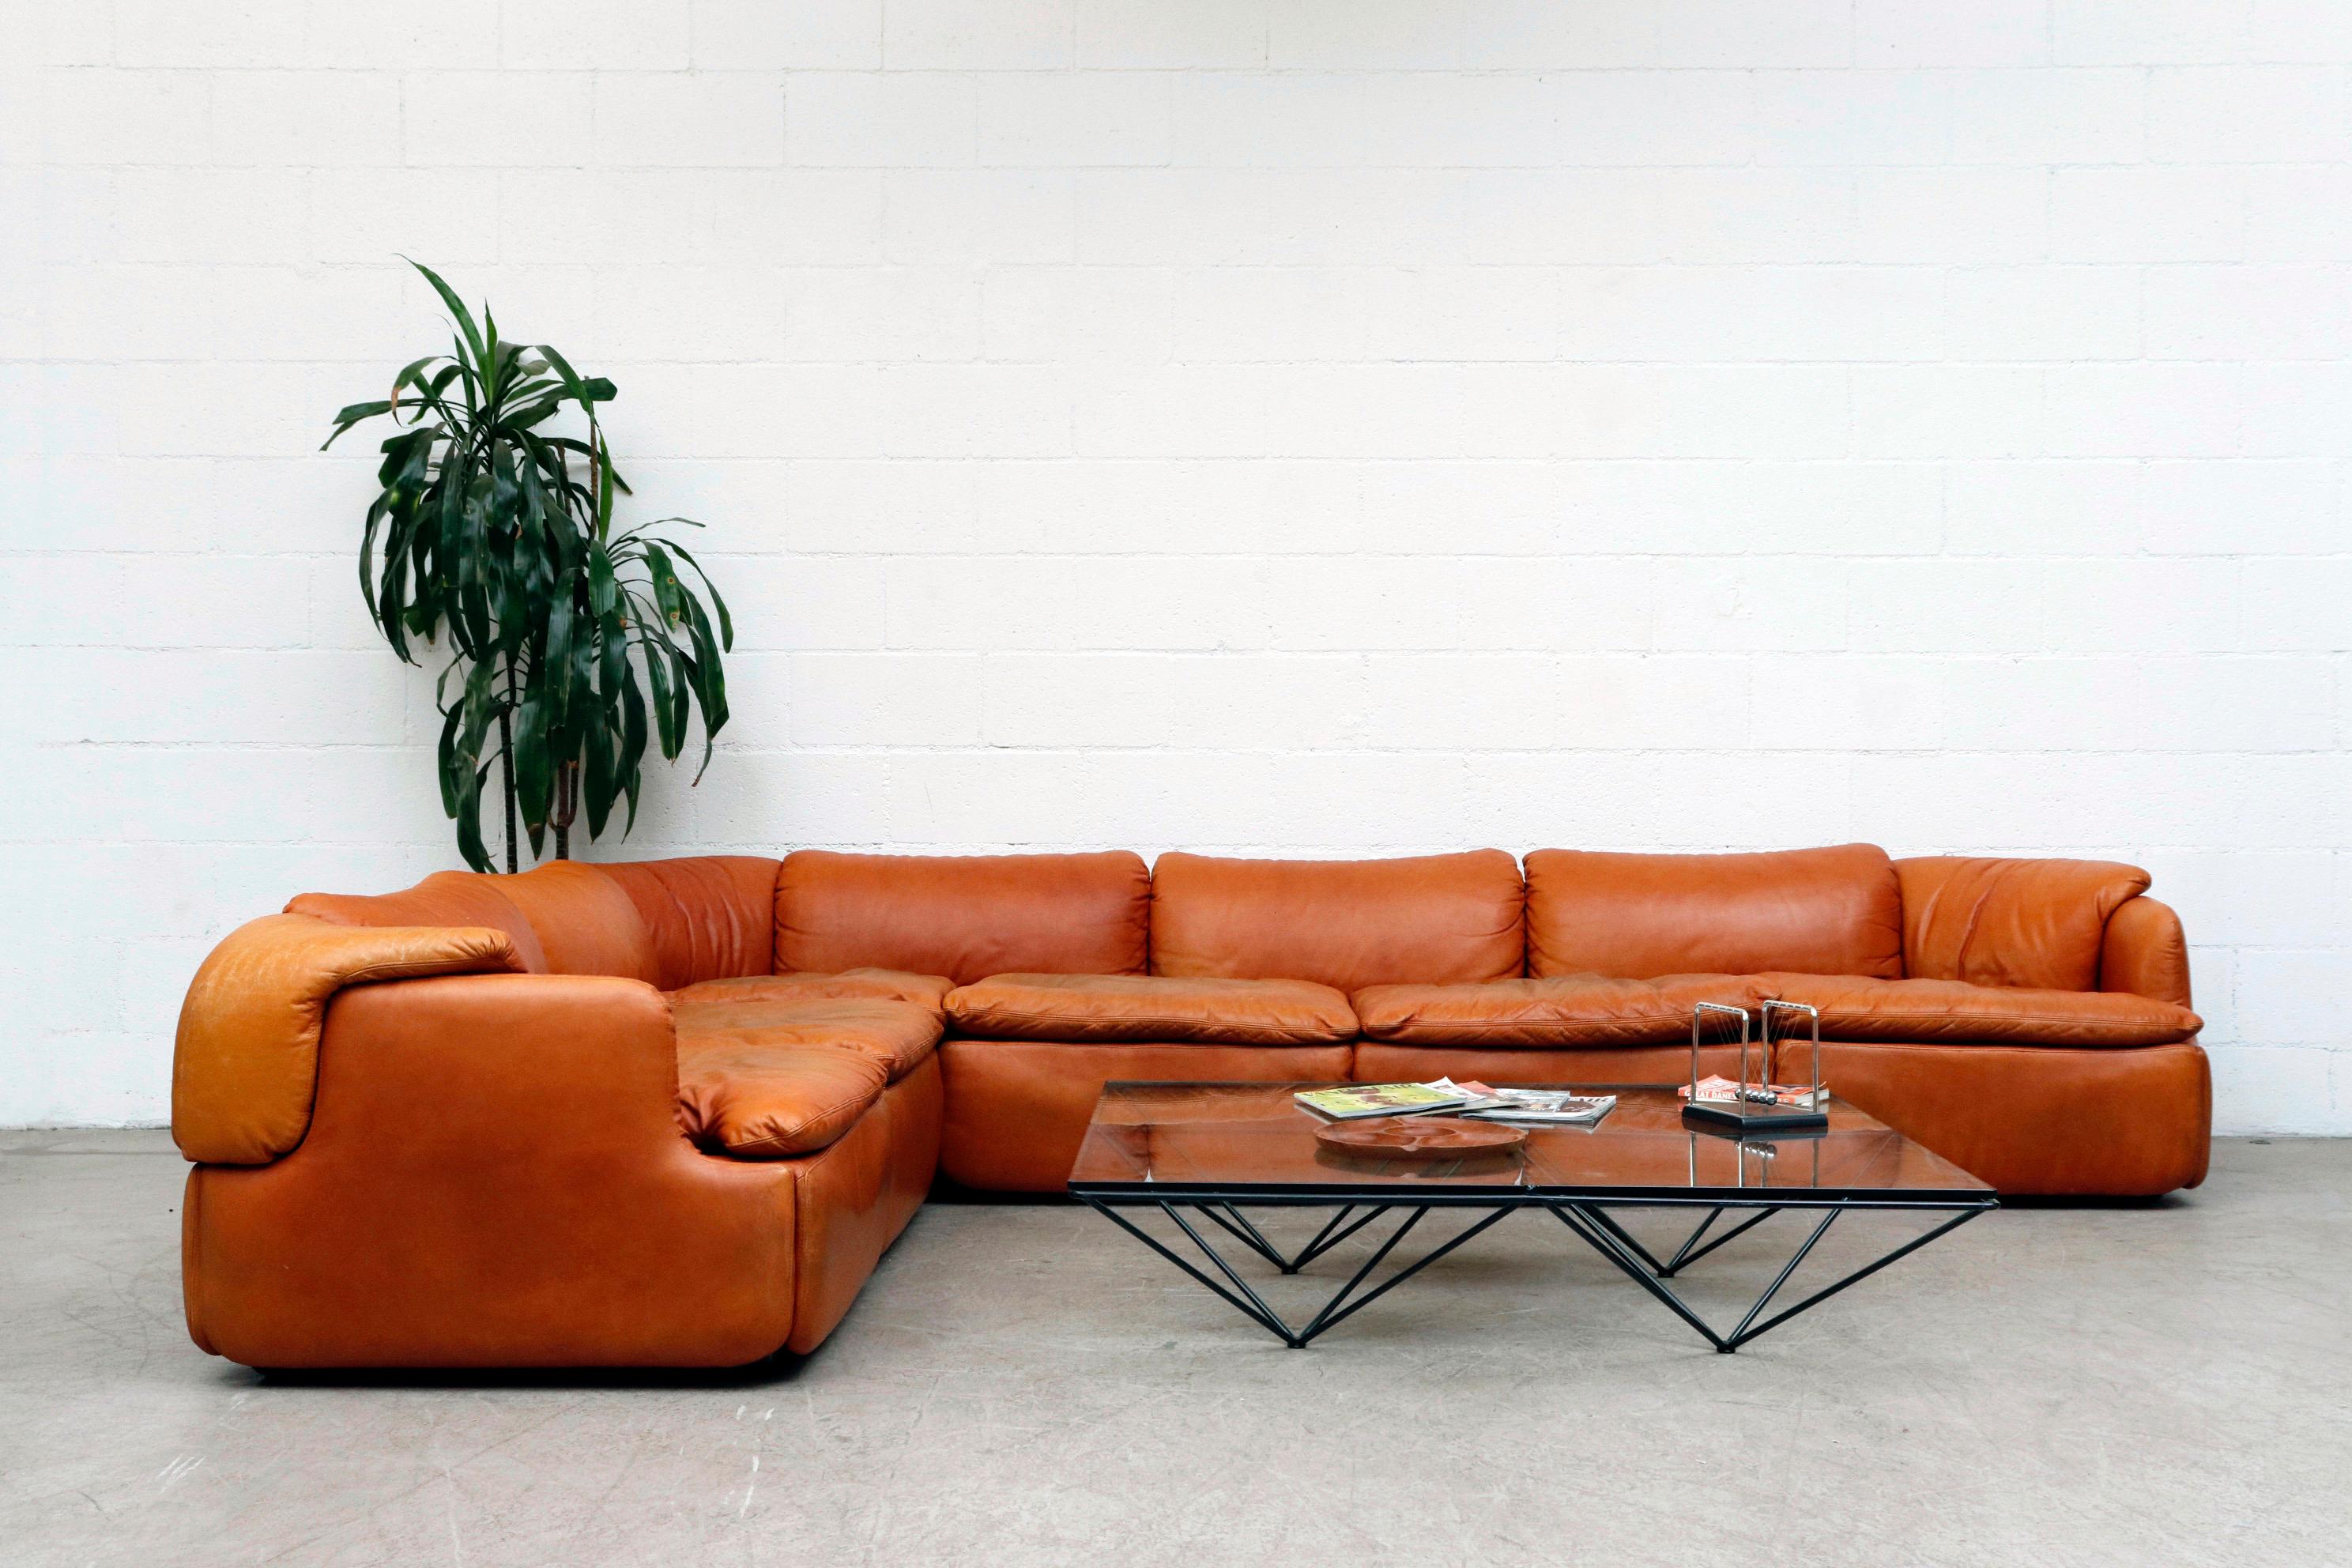 Incredible midcentury Alberto Rosselli 'Confidential' sofa for Saporiti, Italia. Burnt orange leather sectional with puzzle piece cushions. Color touch-up to seat cushion tops, in otherwise original condition with visible wear and patina.